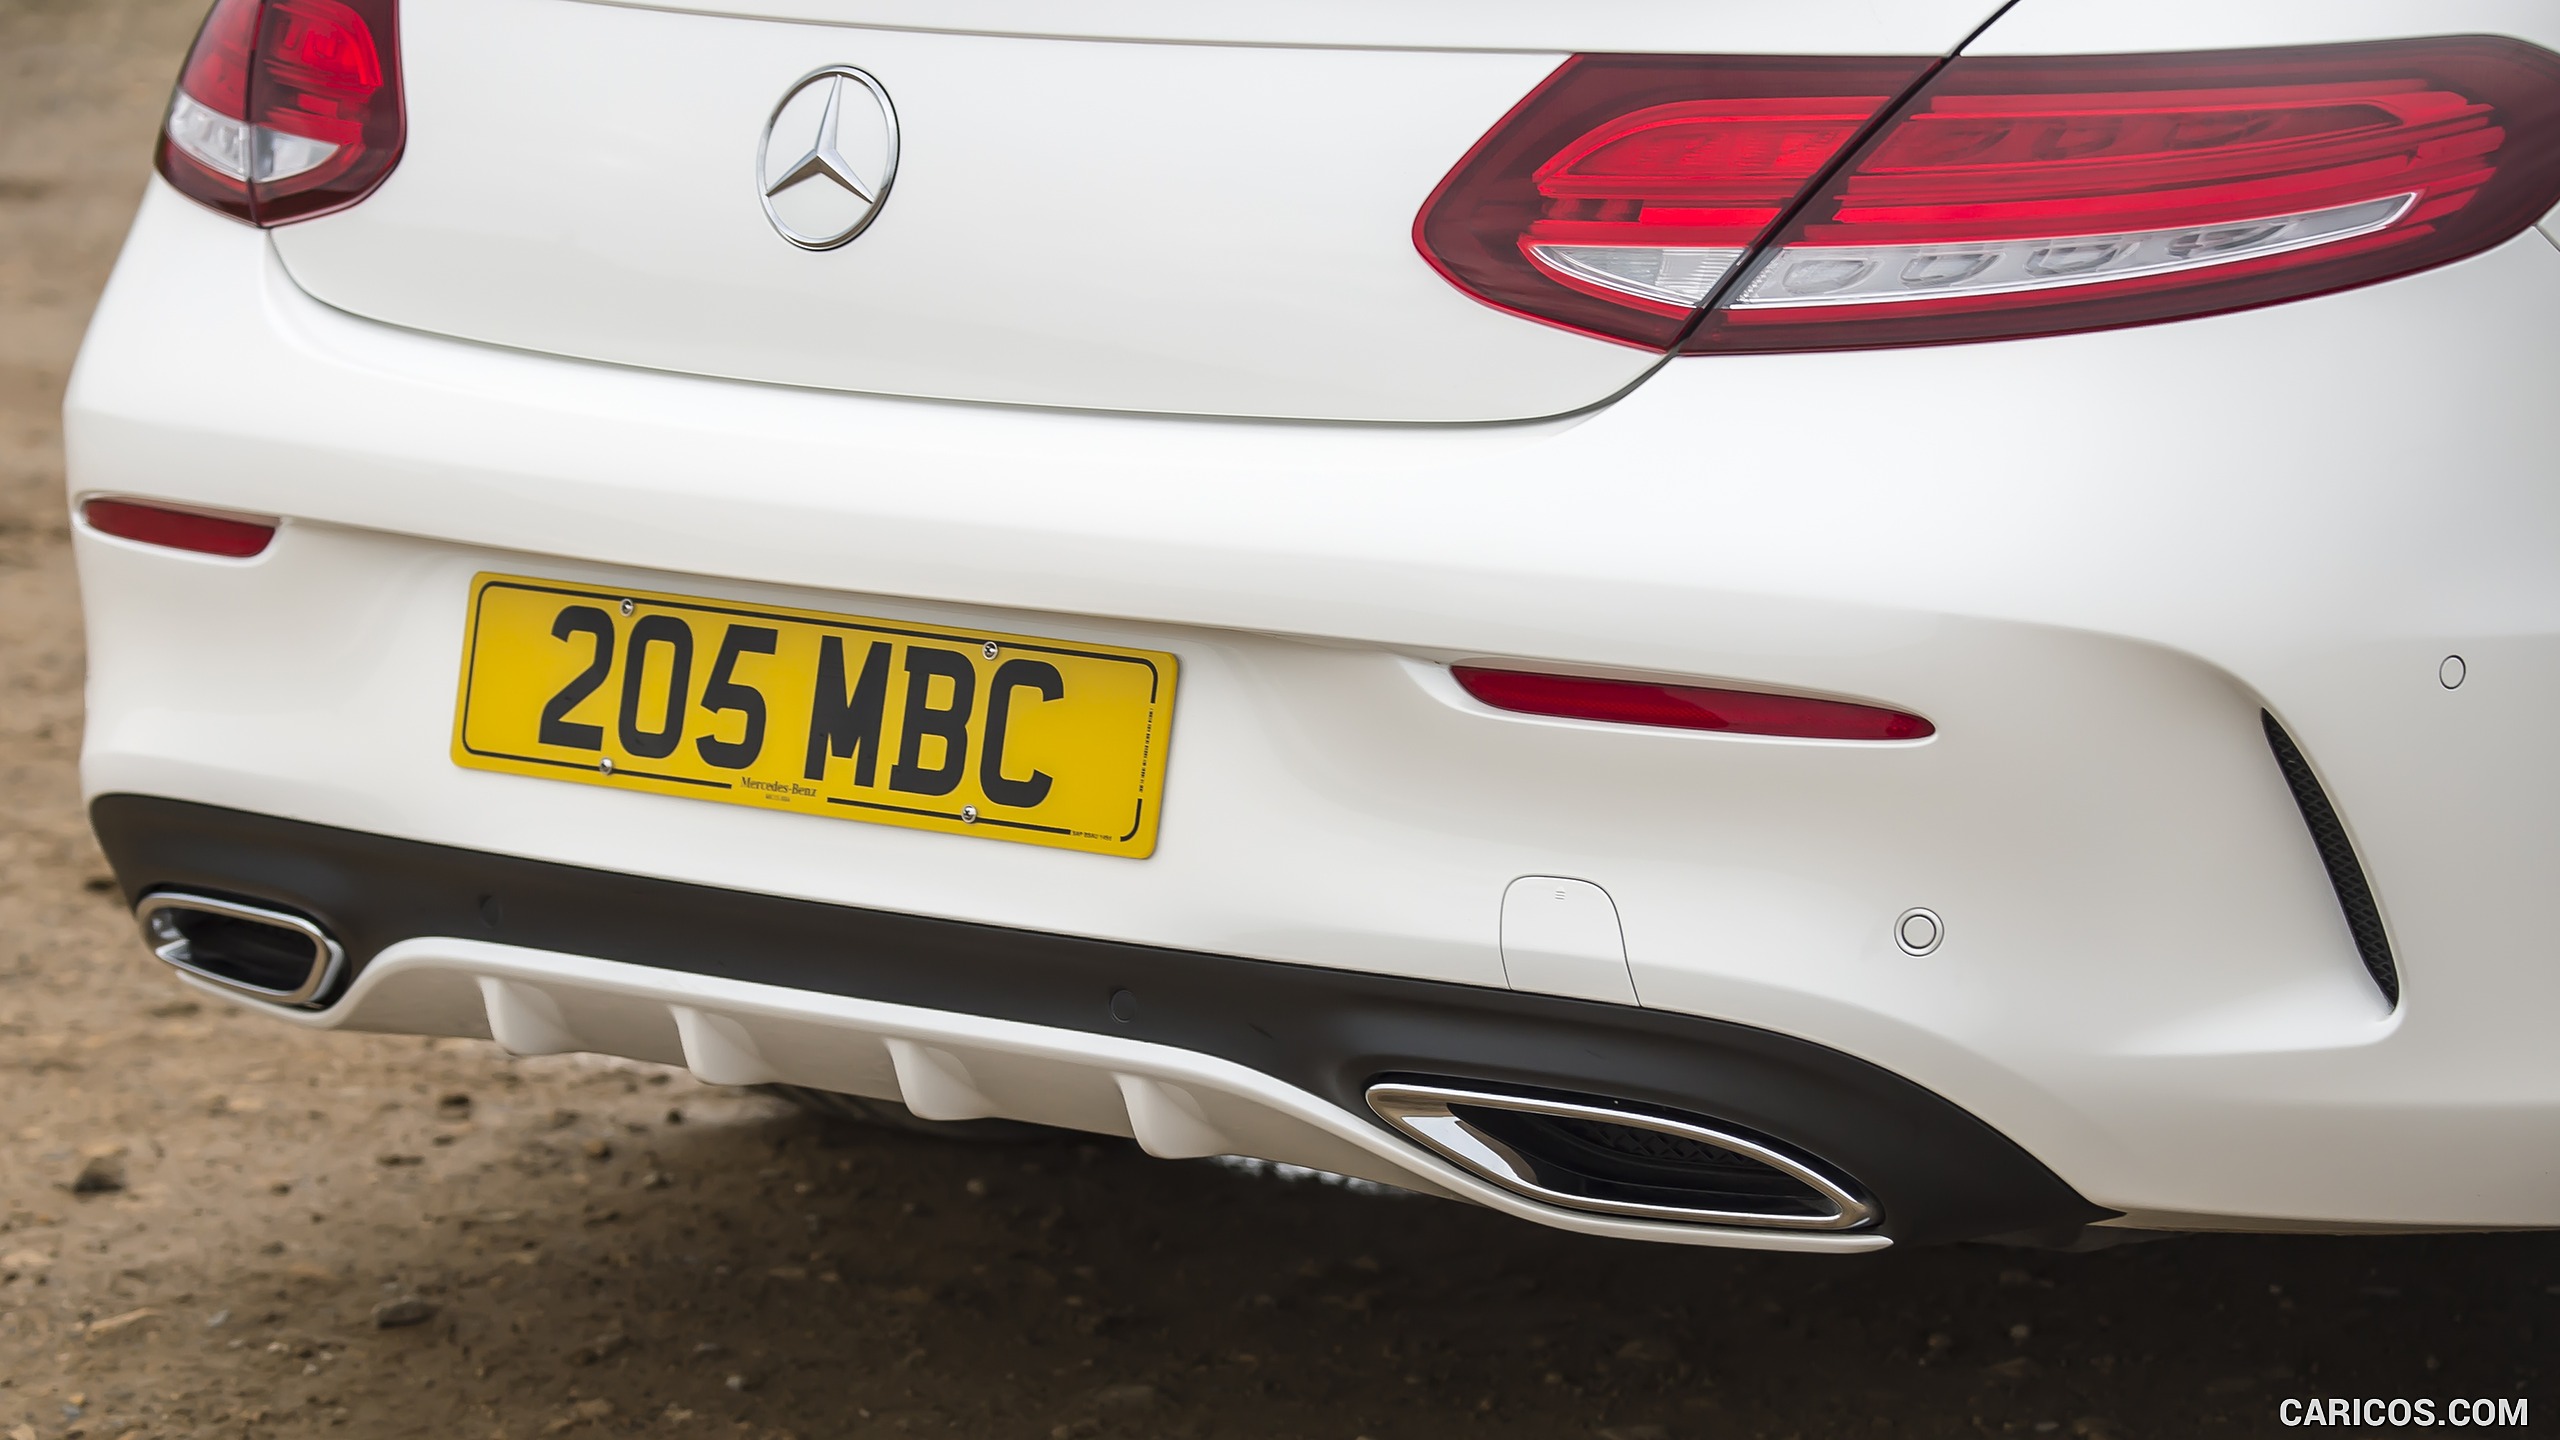 2017 Mercedes-Benz C-Class Coupe (UK-Spec) - Tailpipe, #147 of 210